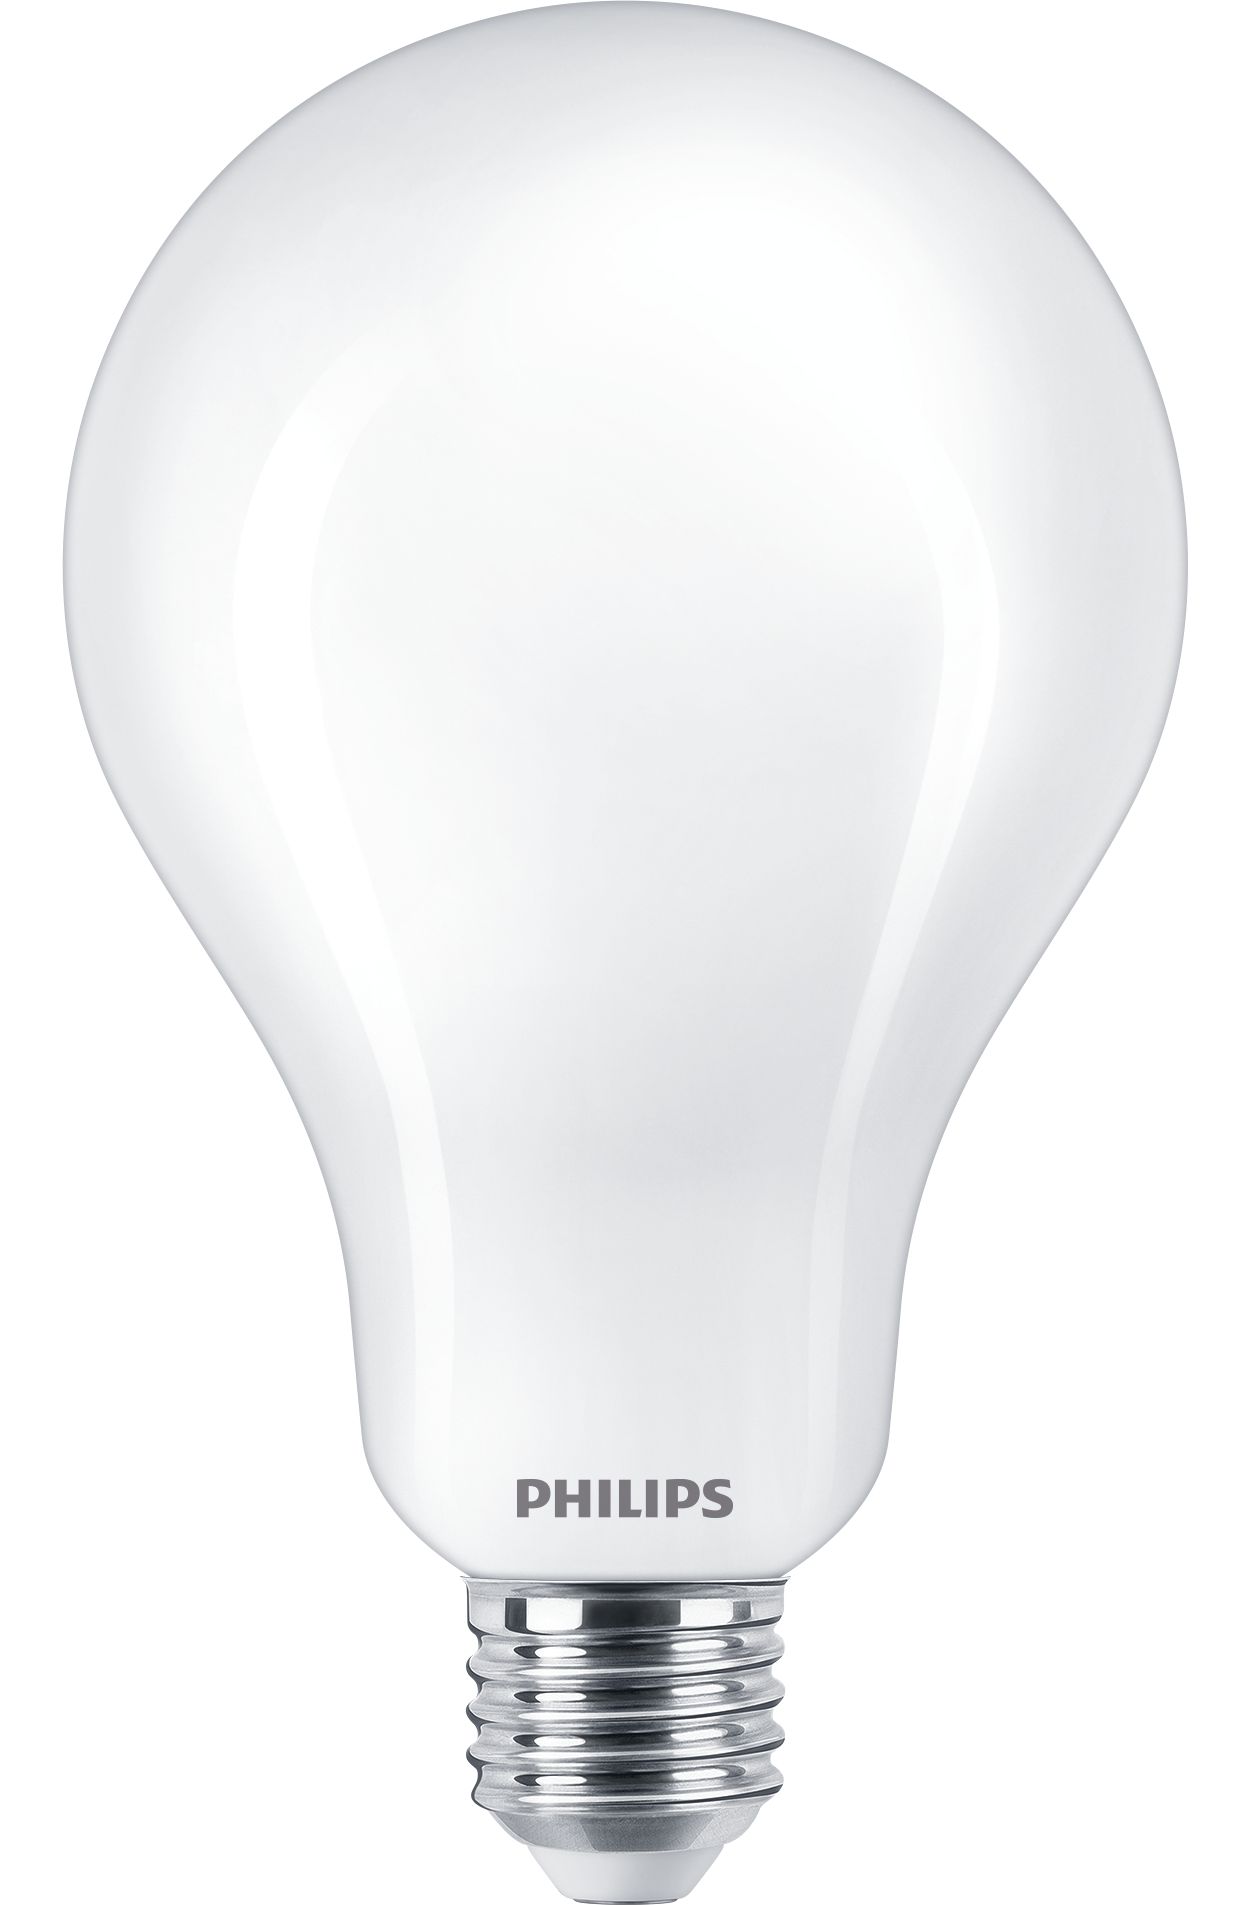 Assimileren naaien Uitbeelding LED classic 200W A95 E27 CW FR ND 1PF/4 | 929002373001 | Philips lighting